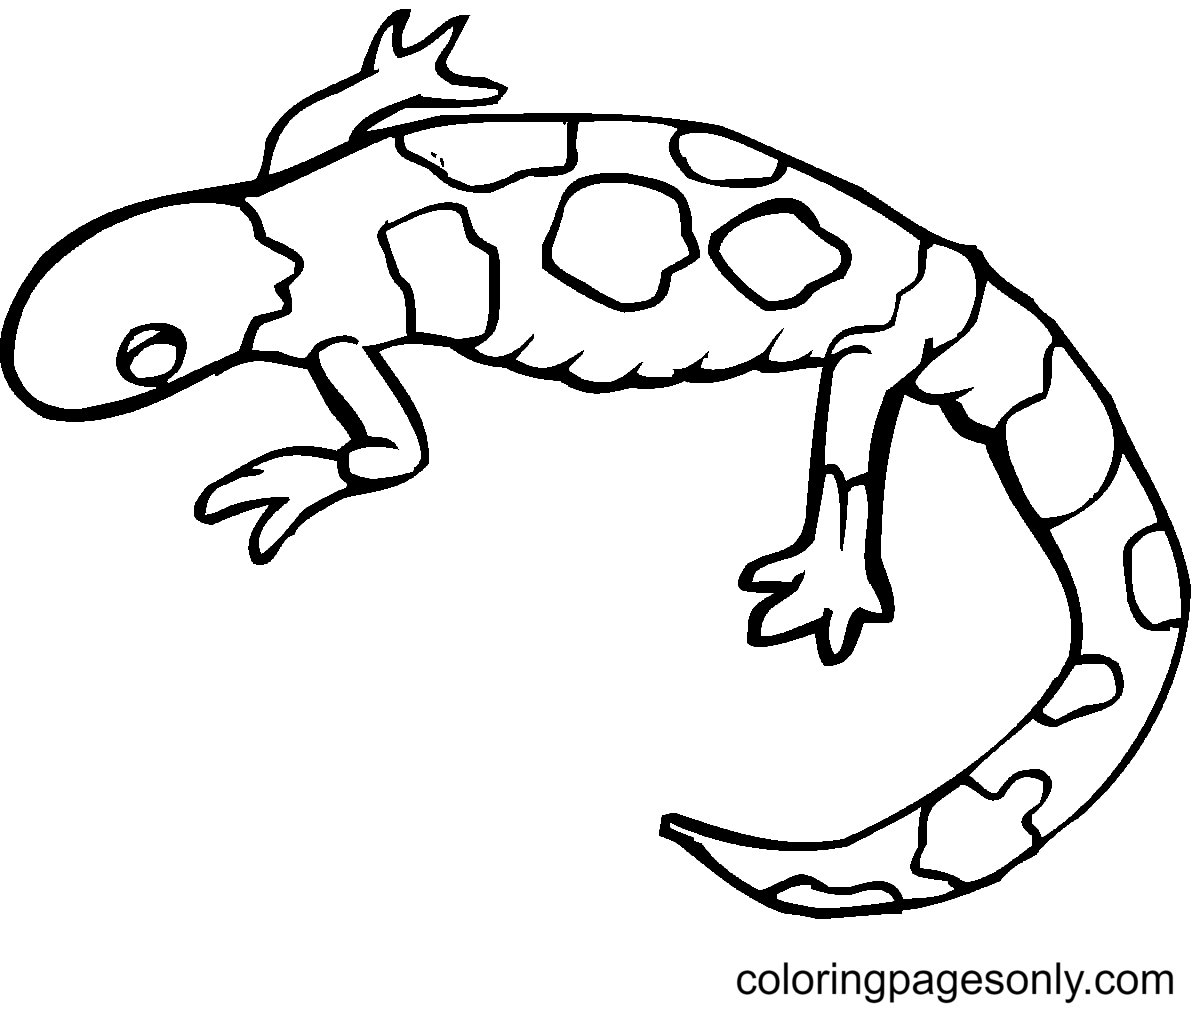 Colorful Gecko Coloring Page